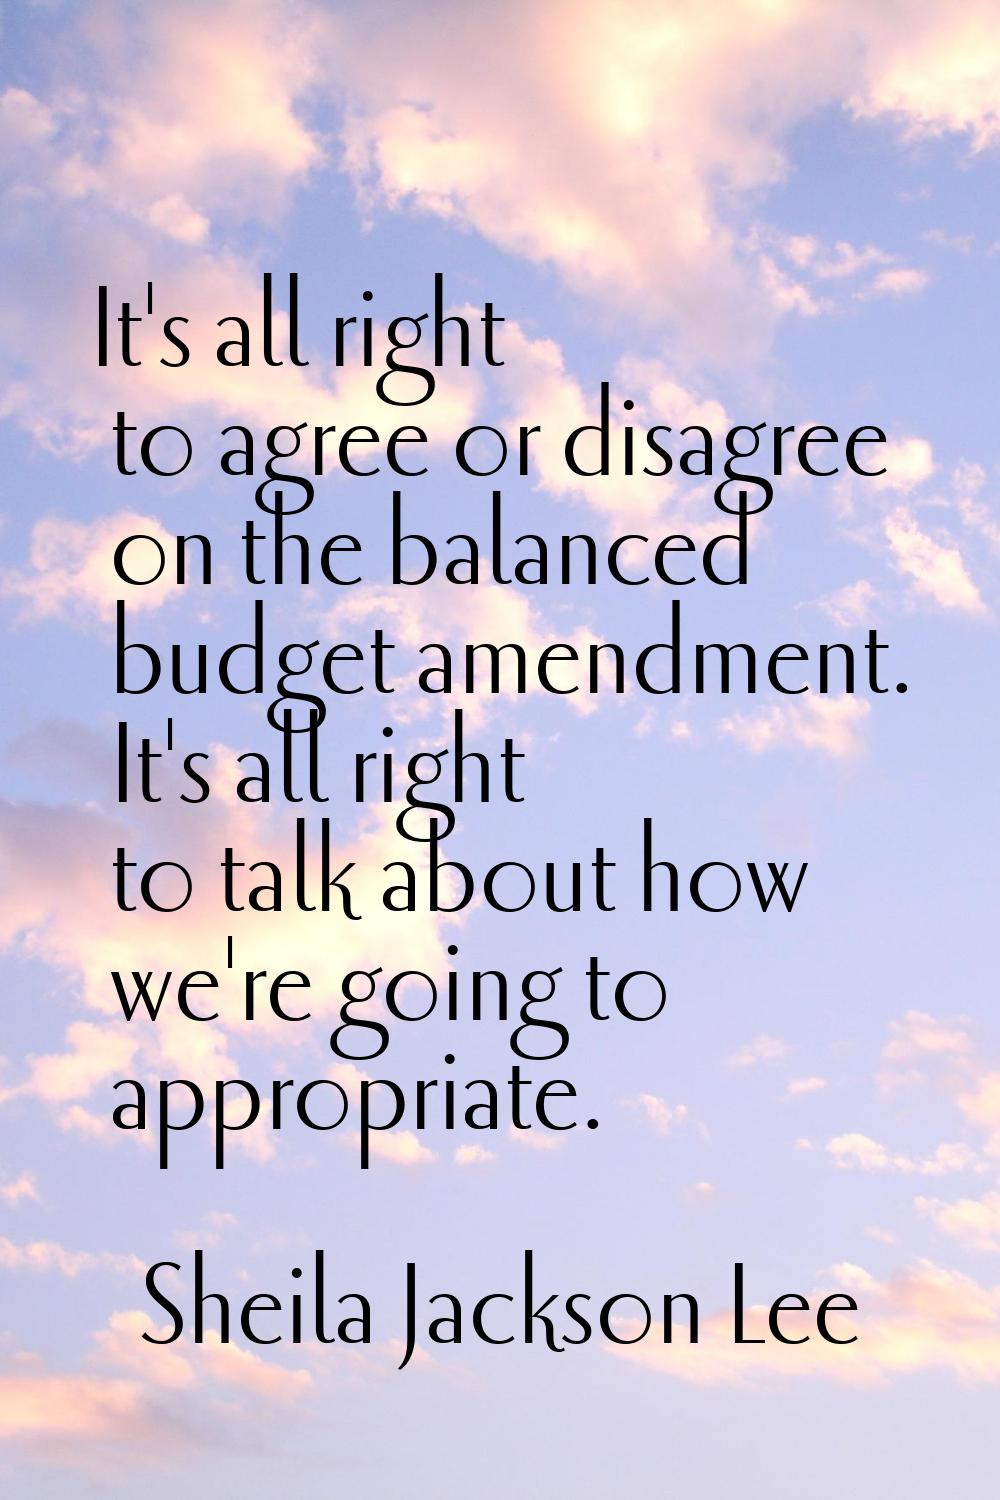 It's all right to agree or disagree on the balanced budget amendment. It's all right to talk about 